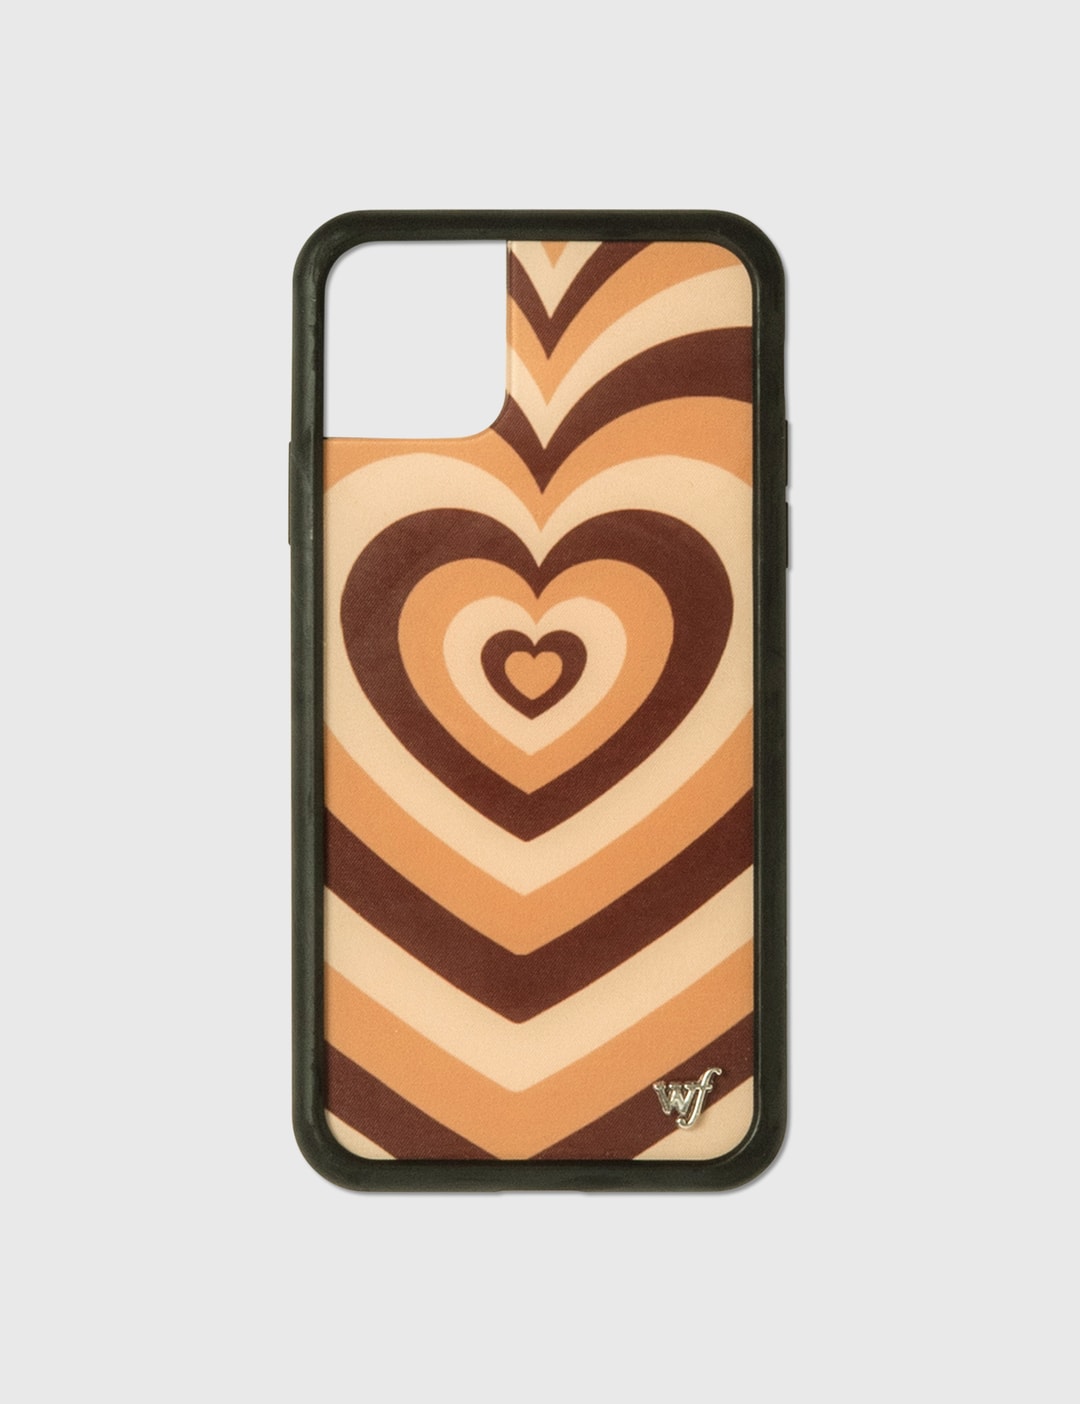 Wildflower Cases Latte Love Iphone Pro Max Case Hbx Globally Curated Fashion And Lifestyle By Hypebeast